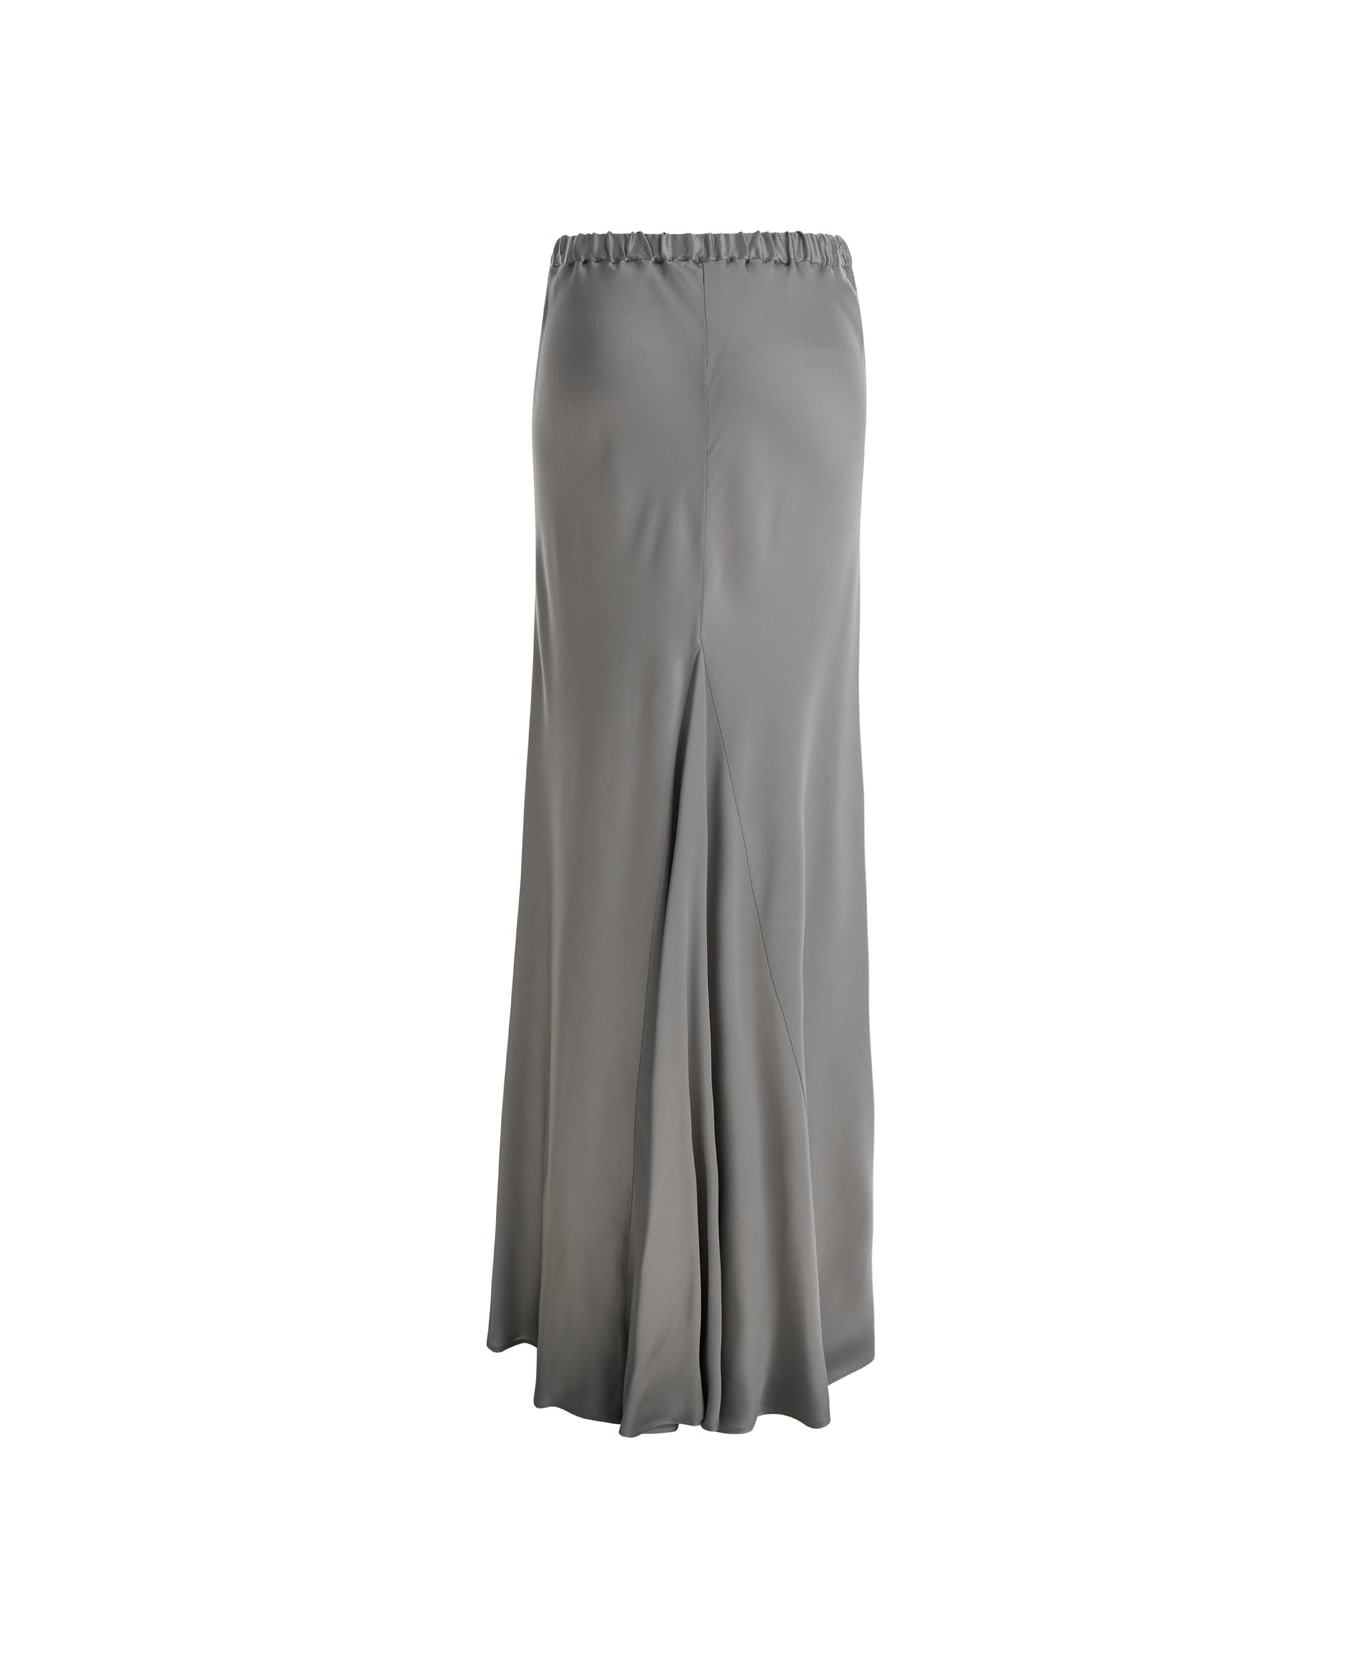 Antonelli Maxi Grey Skirt With Split At The Back In Acetate Blend Woman - Grey